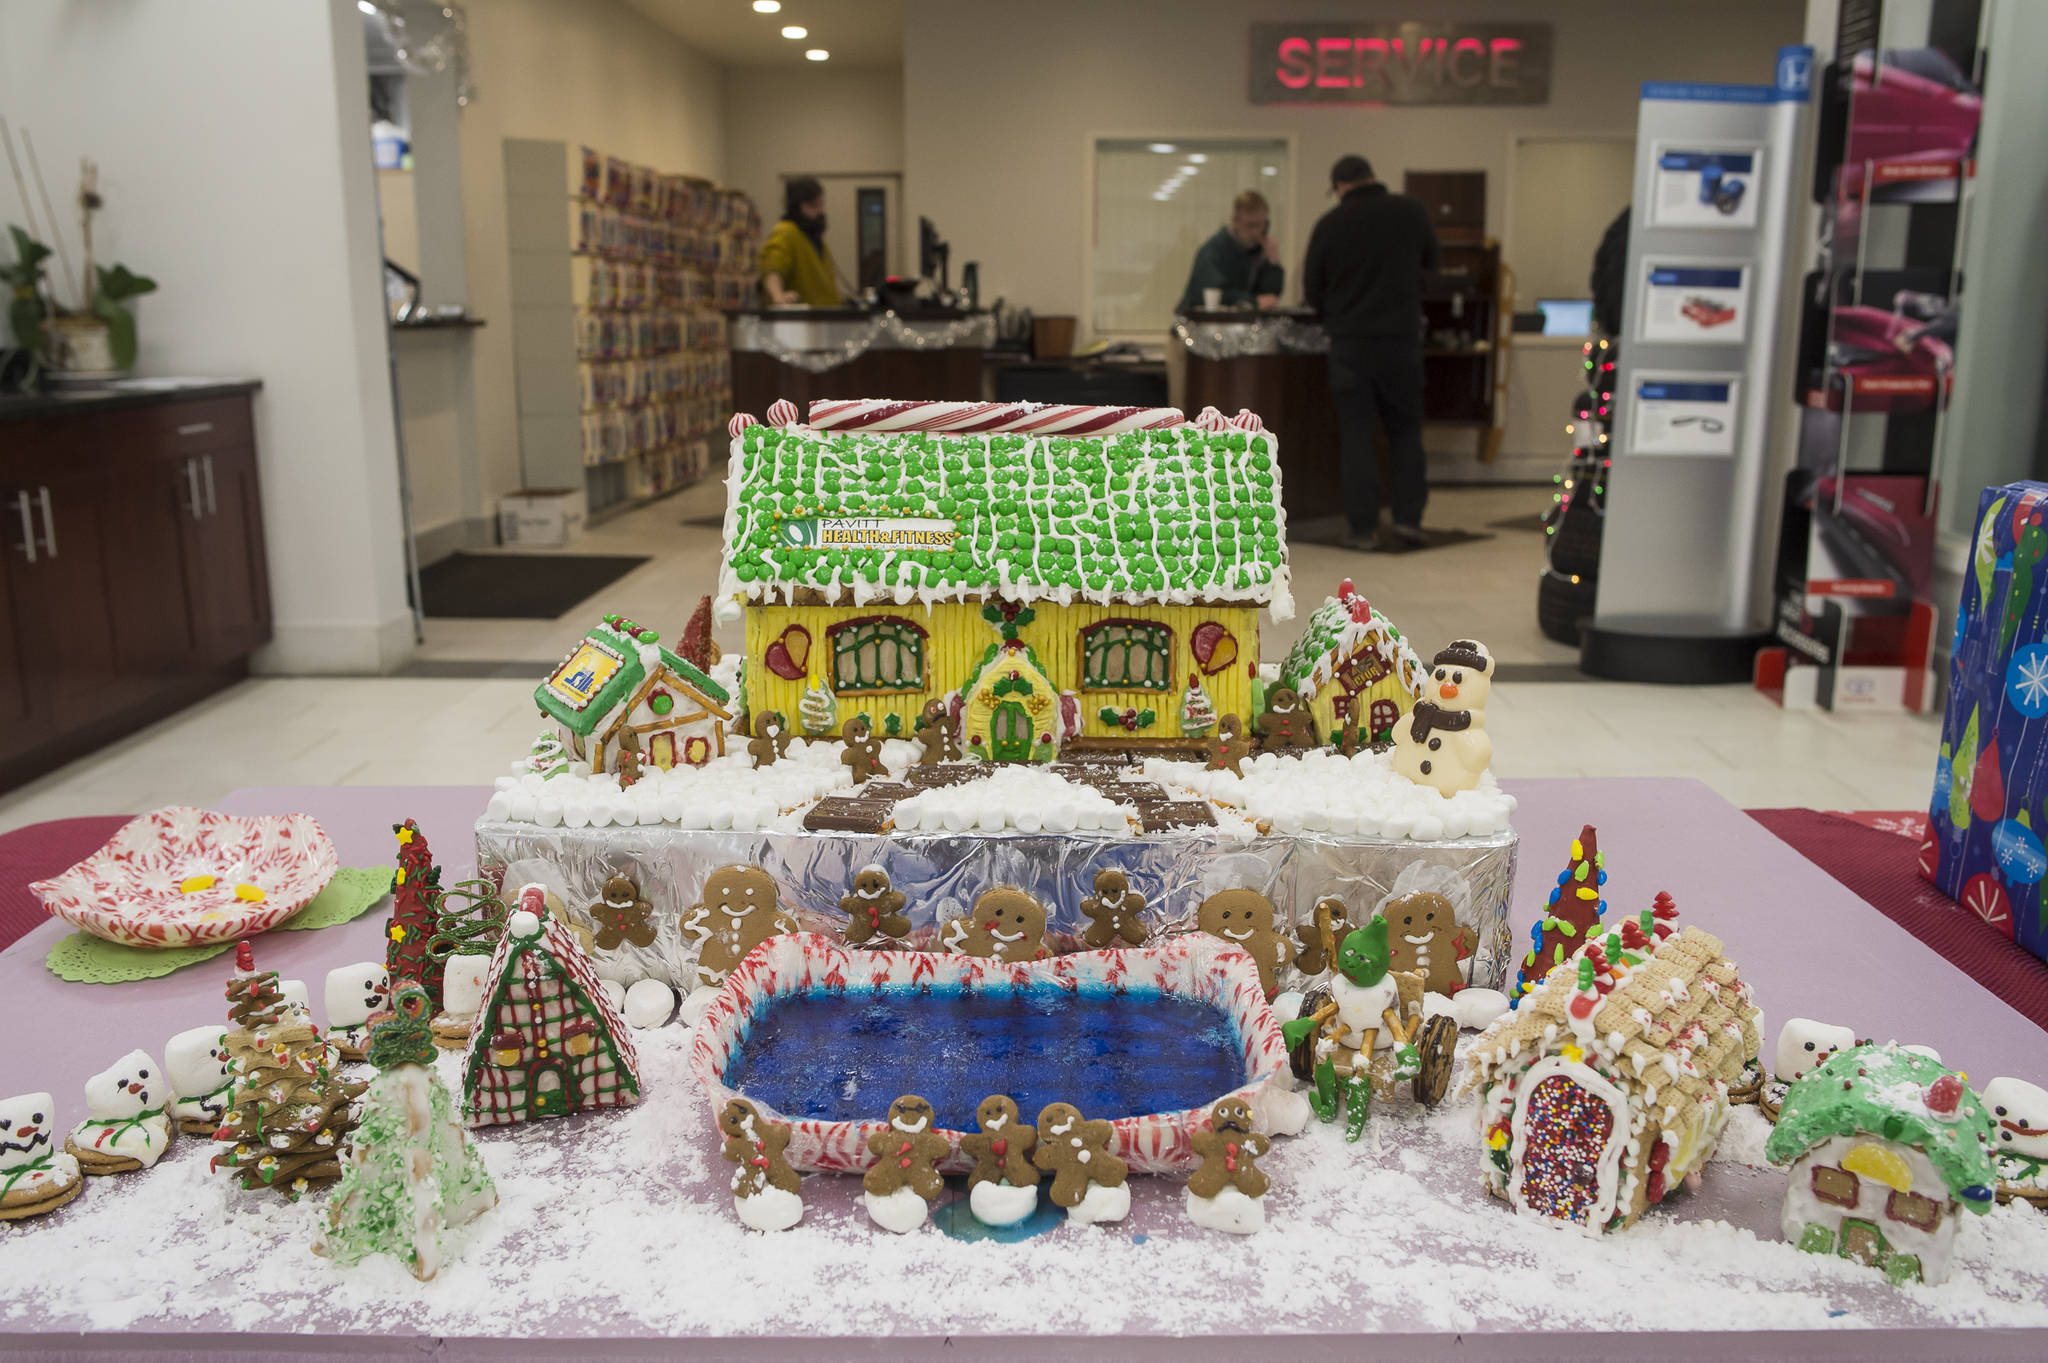 A gingerbread house entered by Pavitt’s Health & Fitness sits on display at Mendenhall Auto on Wednesday, Dec. 12, 2018. The displays are a fundraiser for the Southeast Alaska Foodbank. (Michael Penn | Juneau Empire)